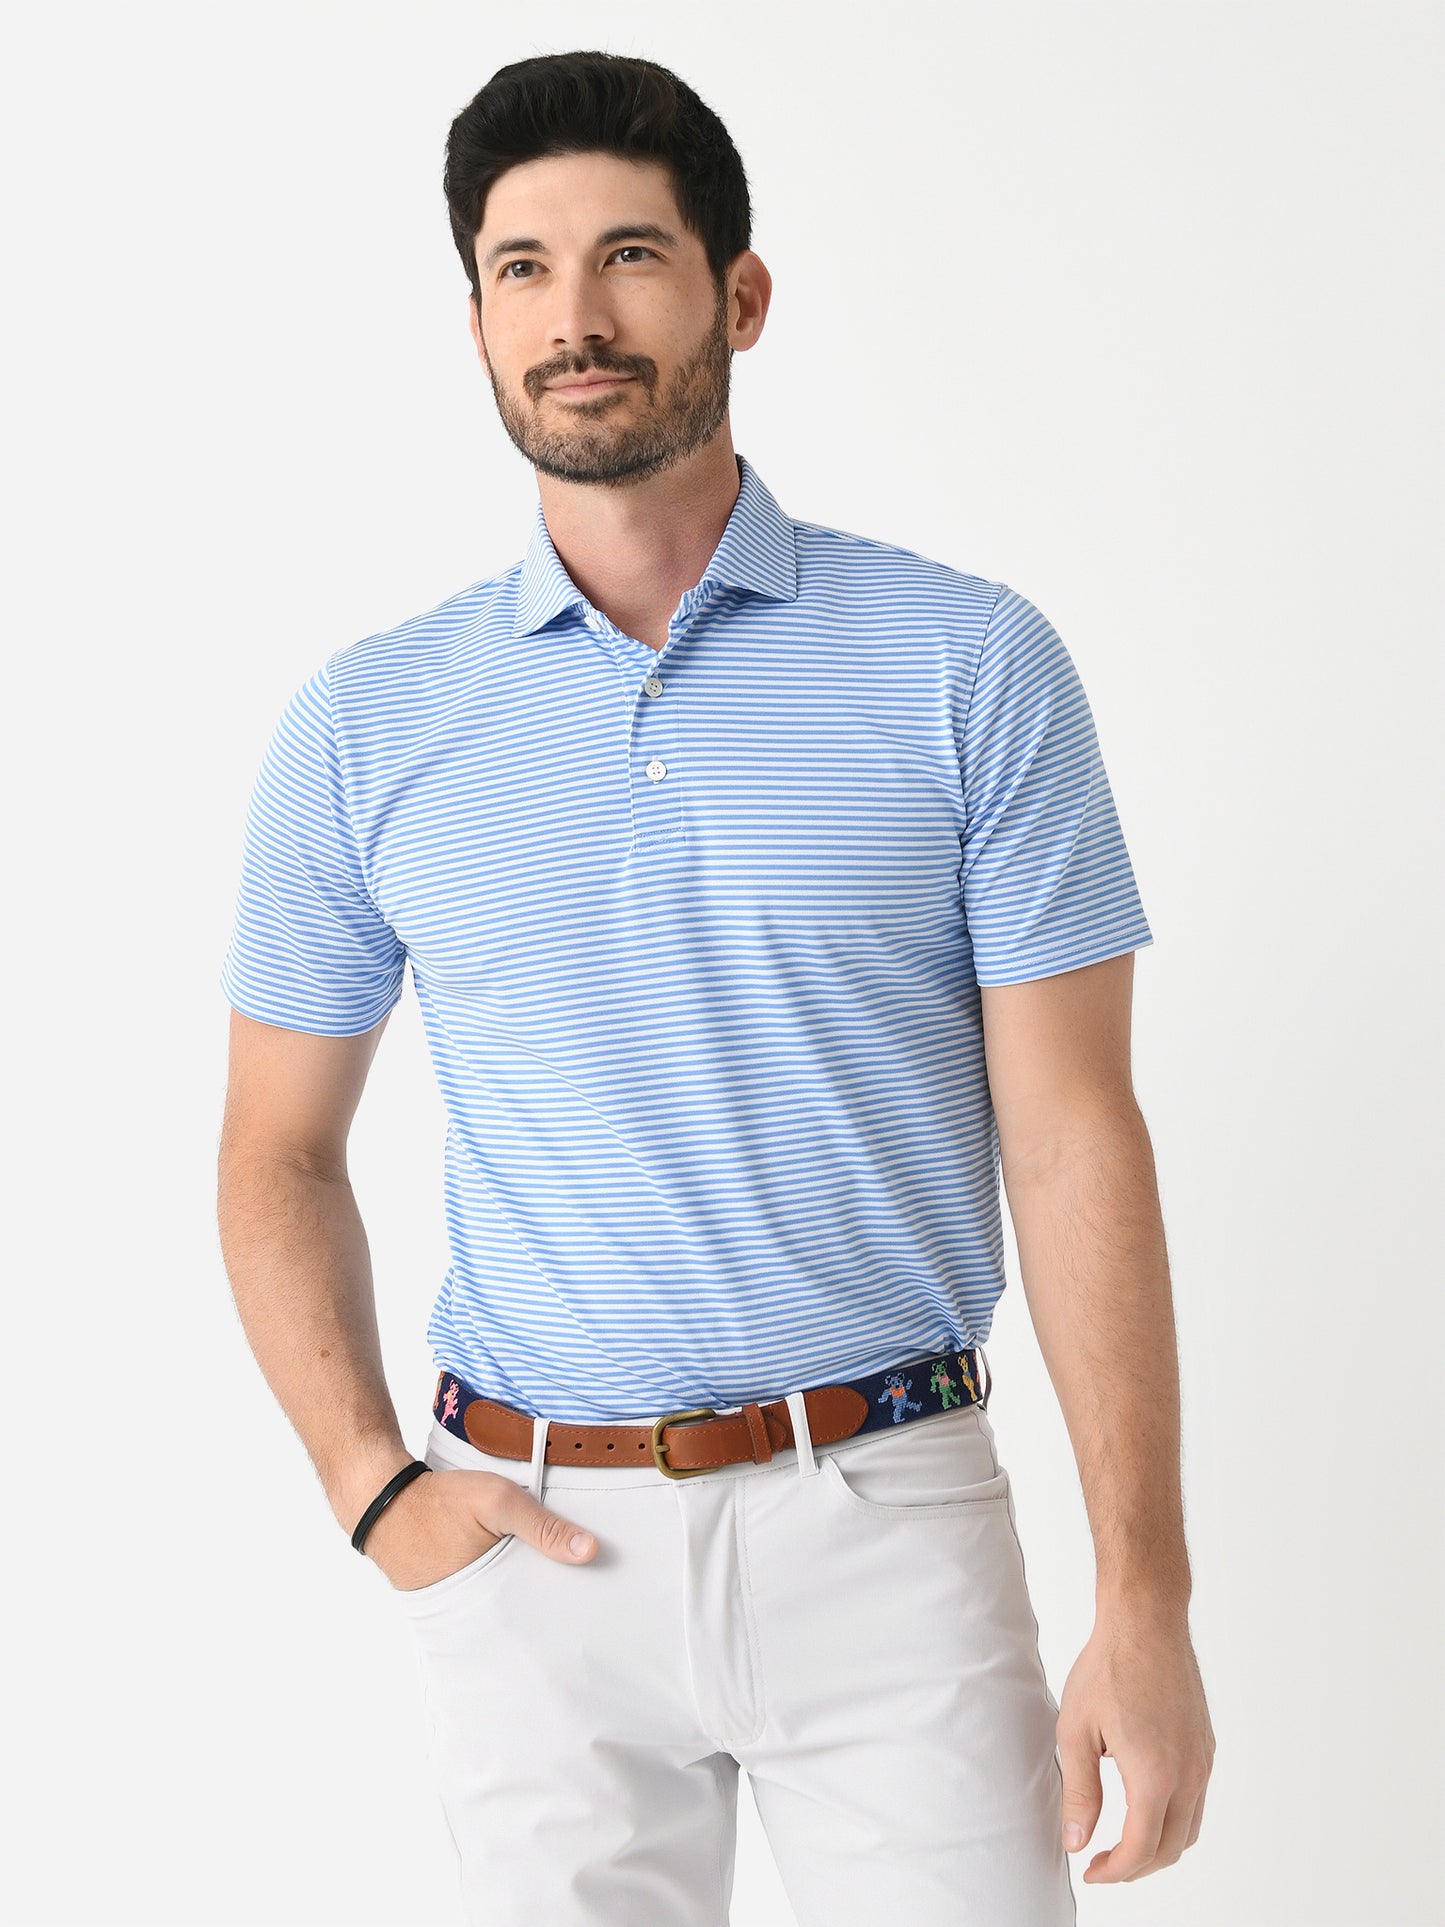 Holderness + Bourne Men's The Maxwell Polo